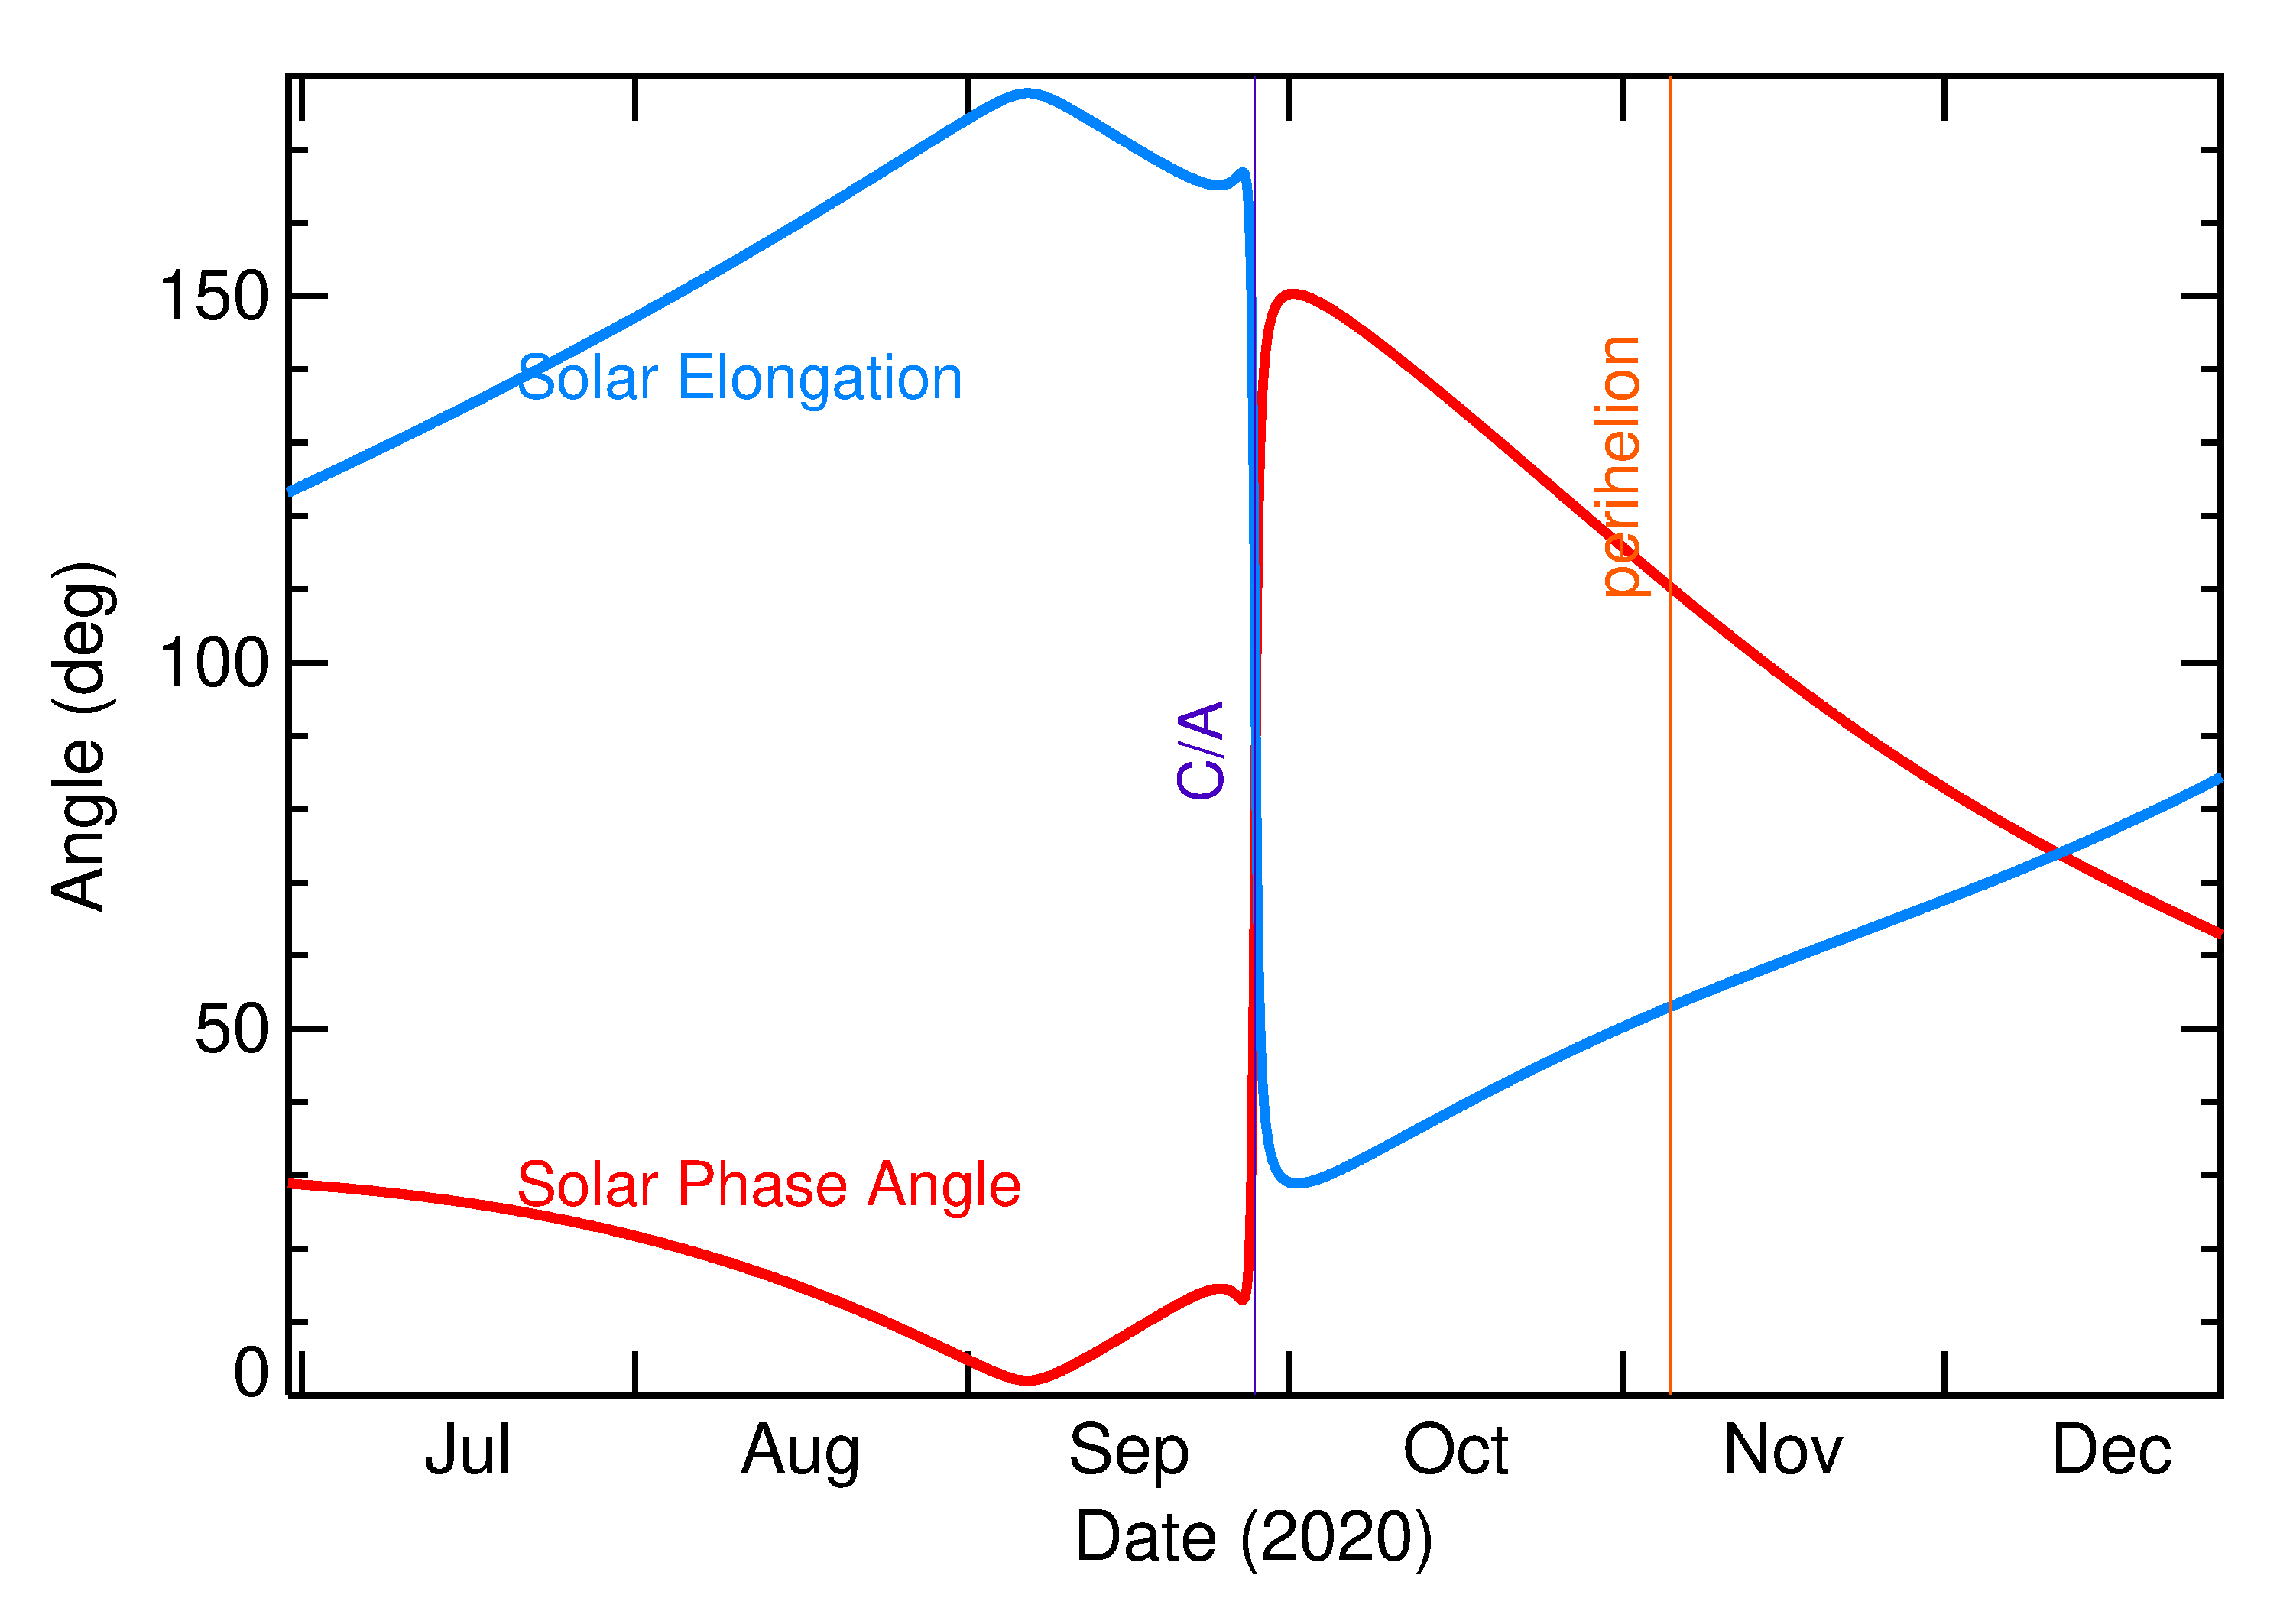 Solar Elongation and Solar Phase Angle of 2020 SQ4 in the months around closest approach